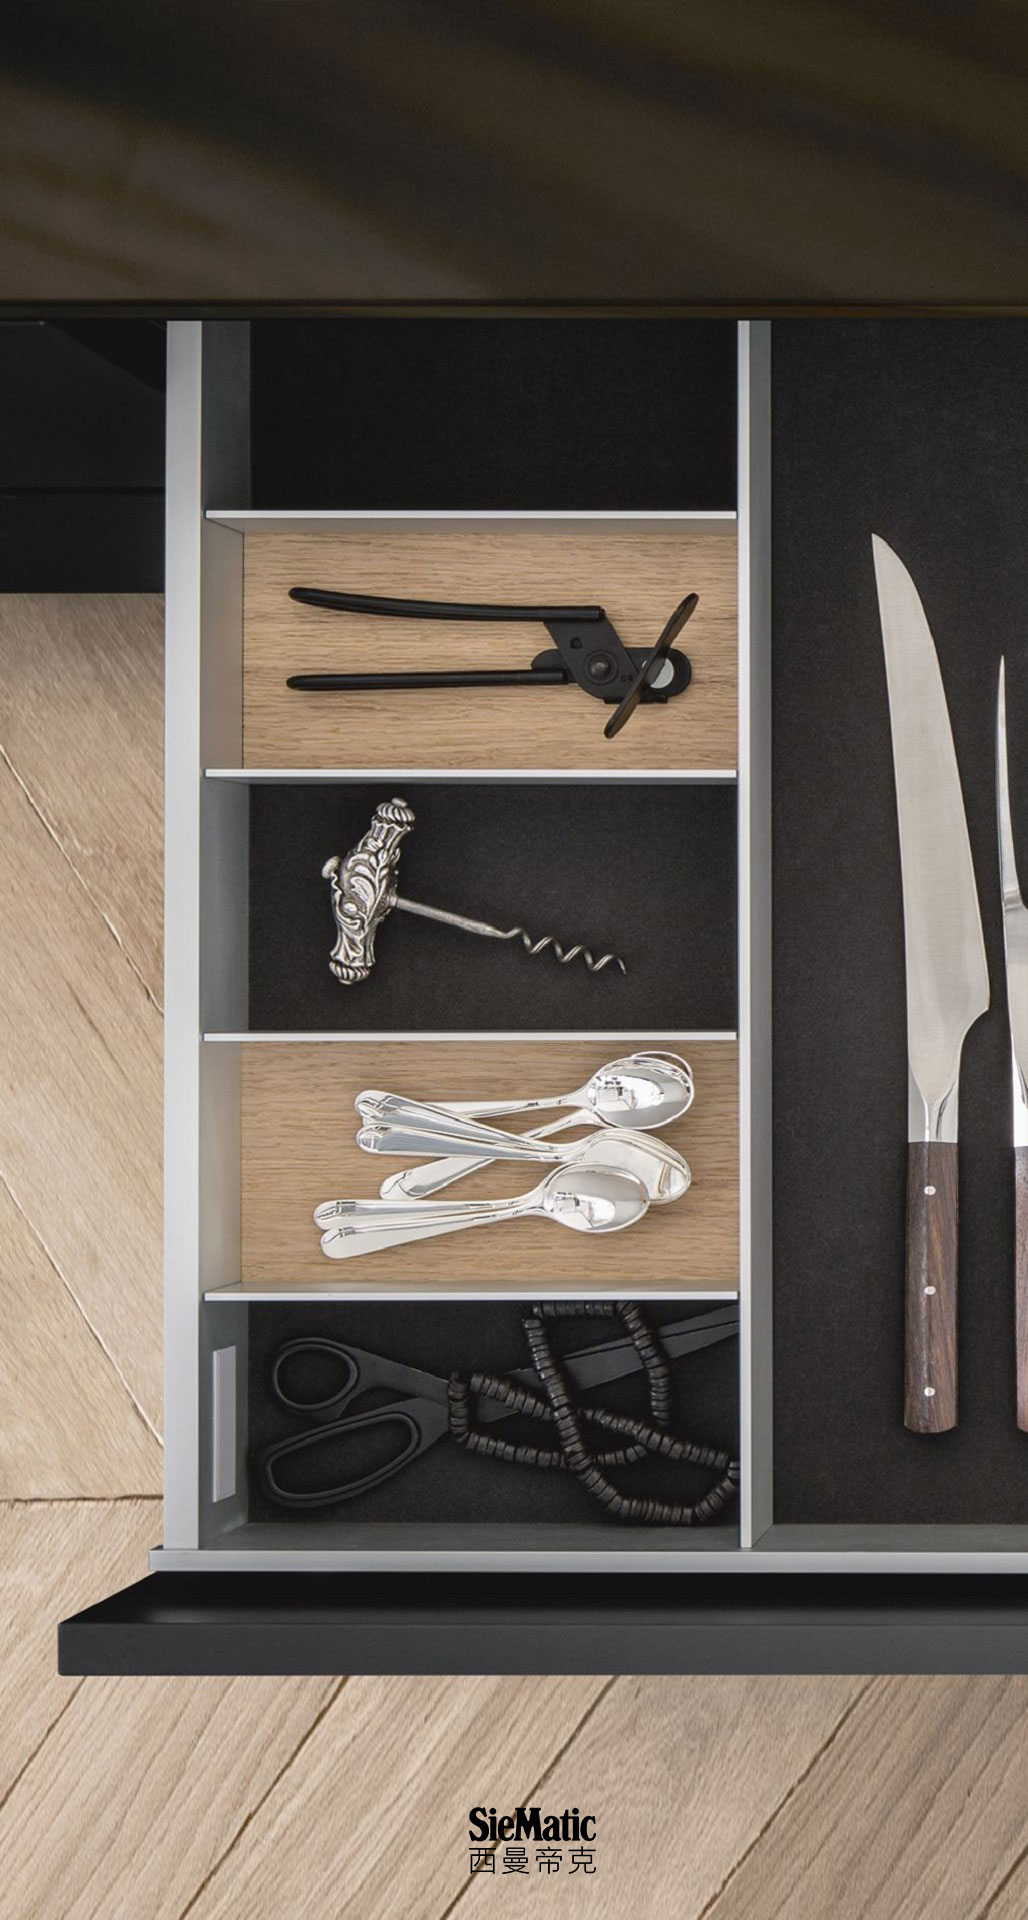 Cutlery and other functional inserts from the SieMatic Aluminum Interior Accessories System